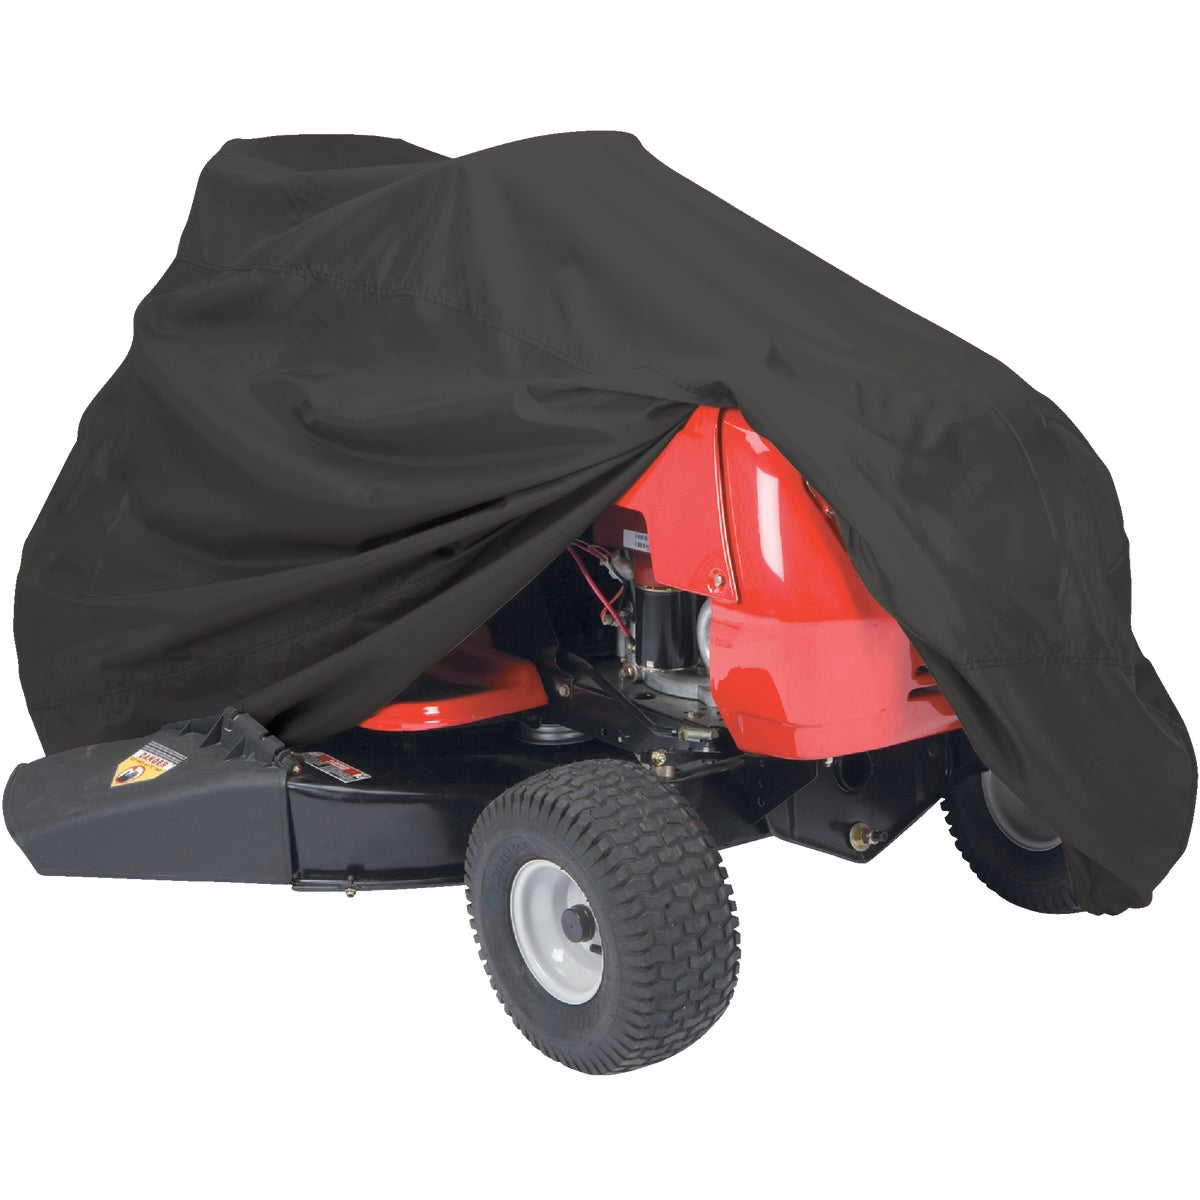 Item 730165, Protective cover fits most riding lawn tractors.